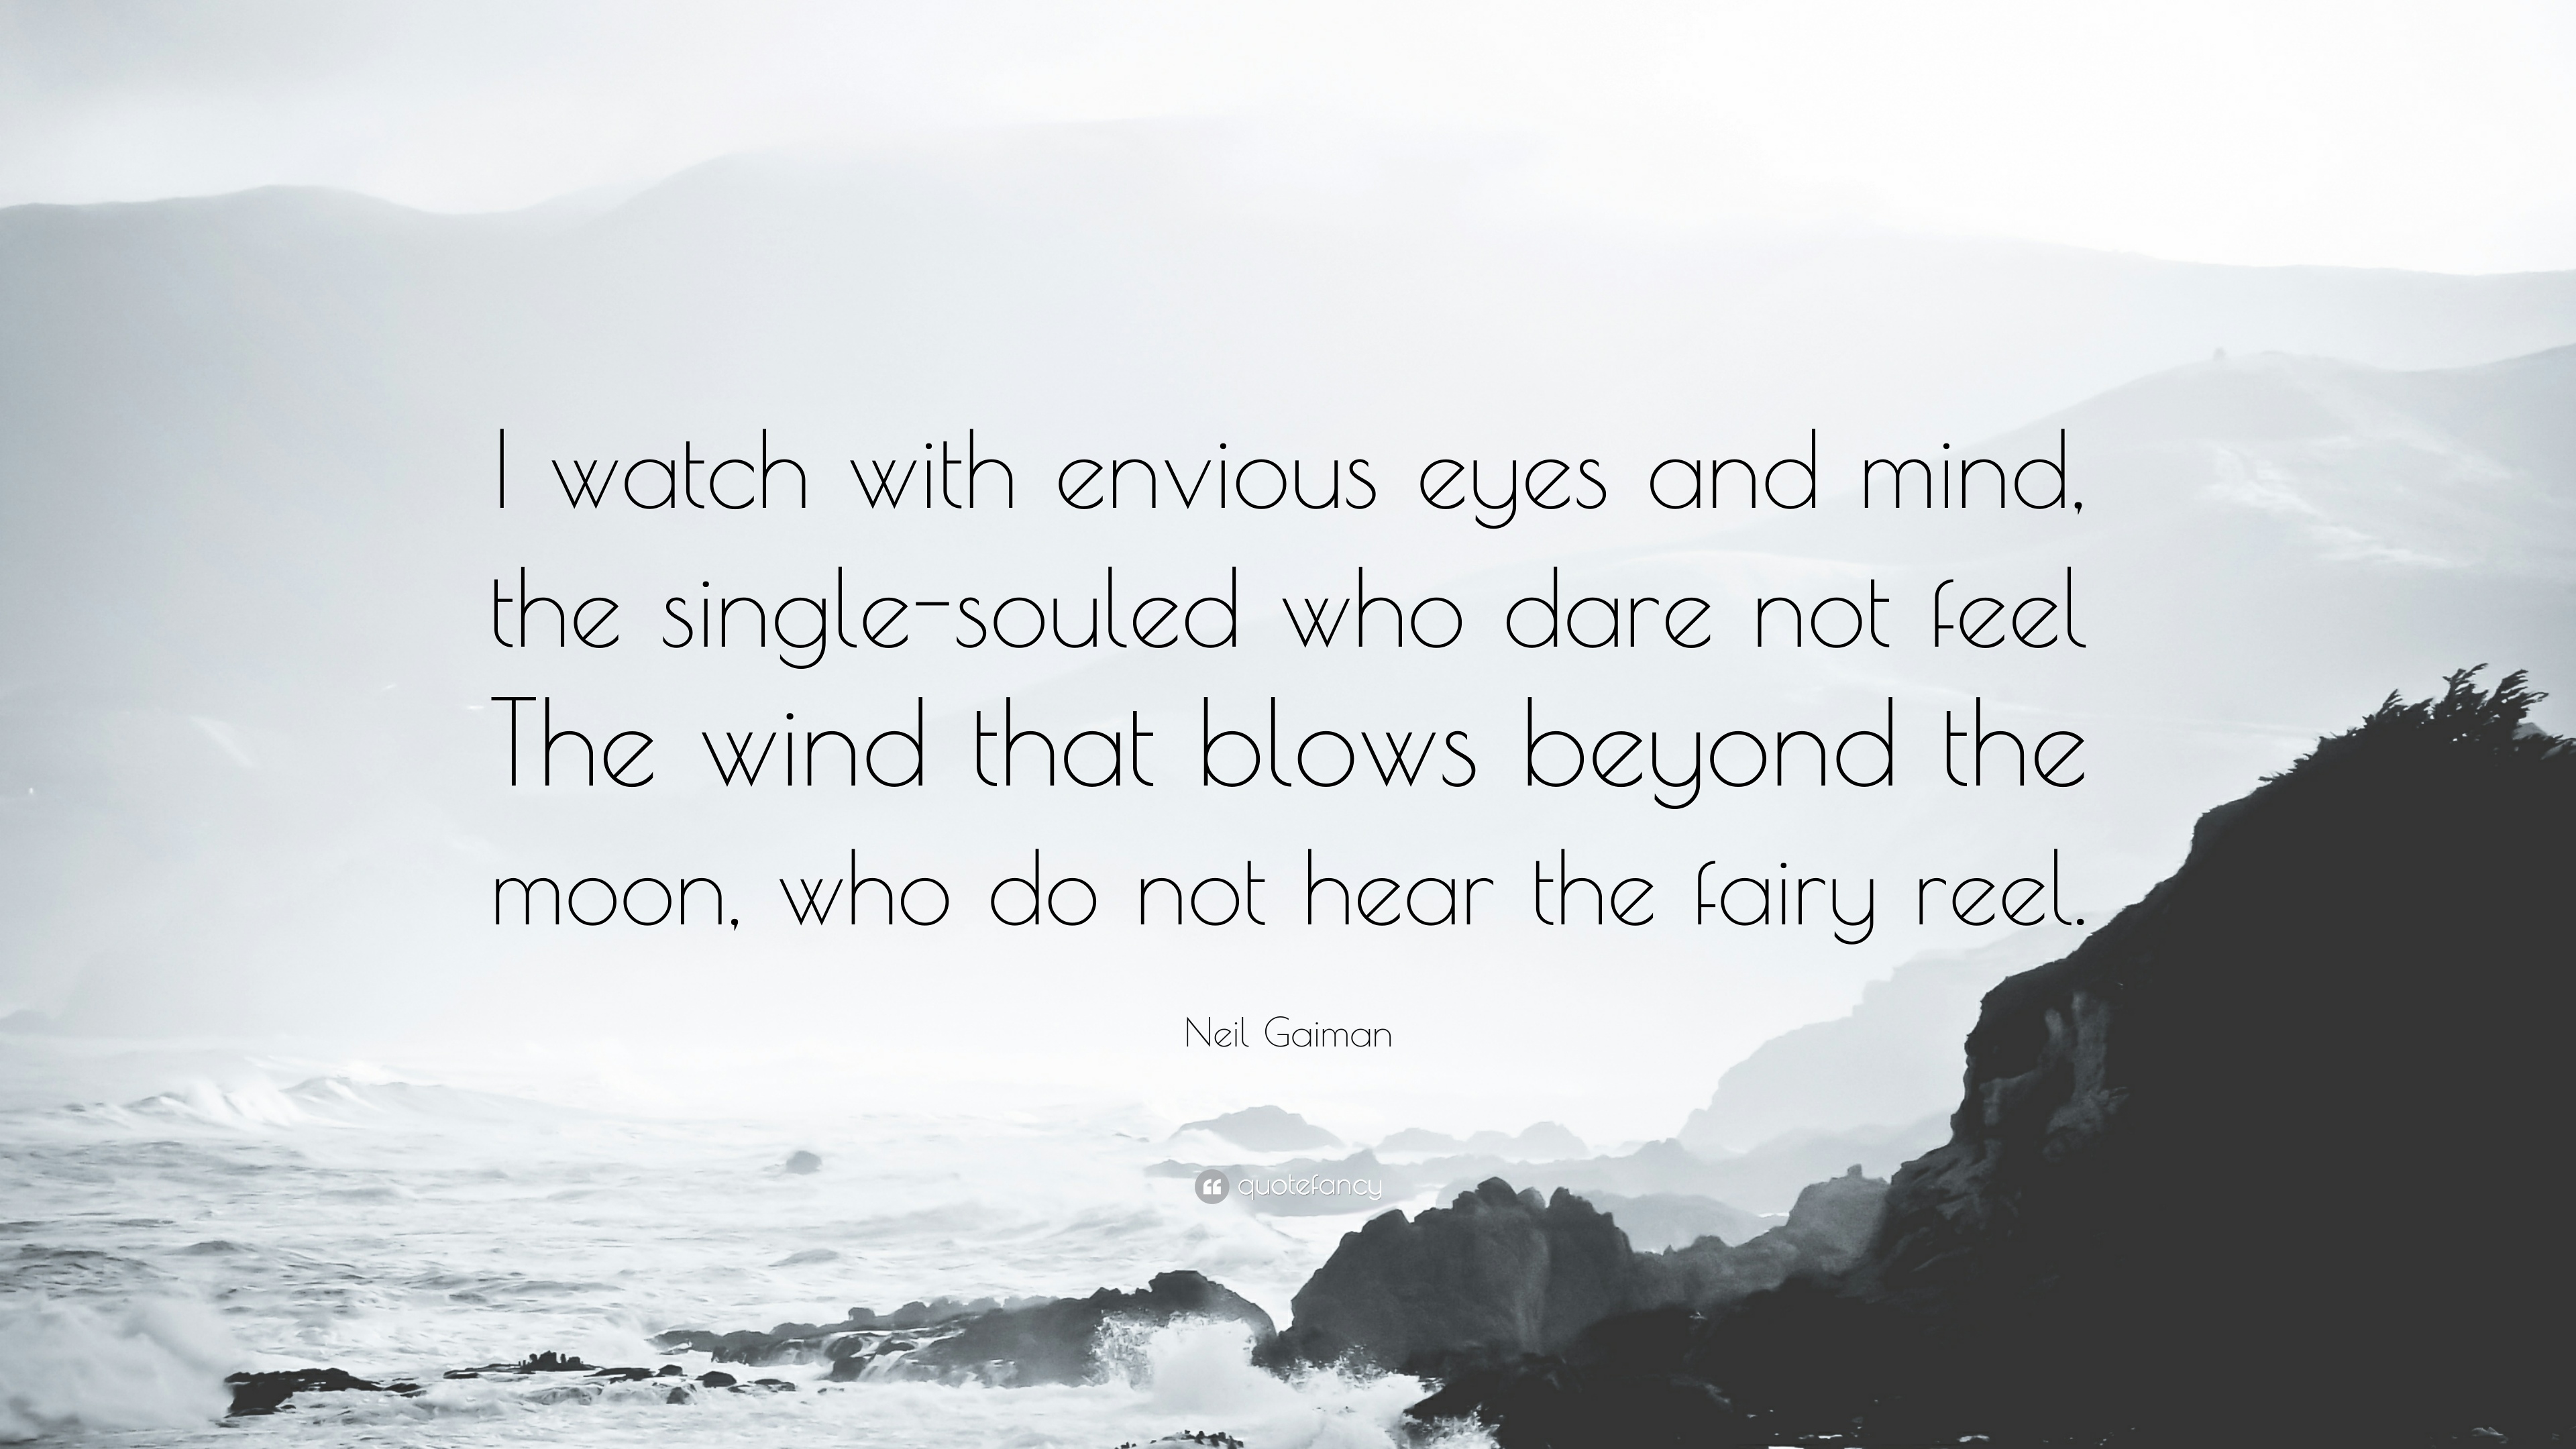 Neil Gaiman Quote: “I watch with envious eyes and mind, the single ...